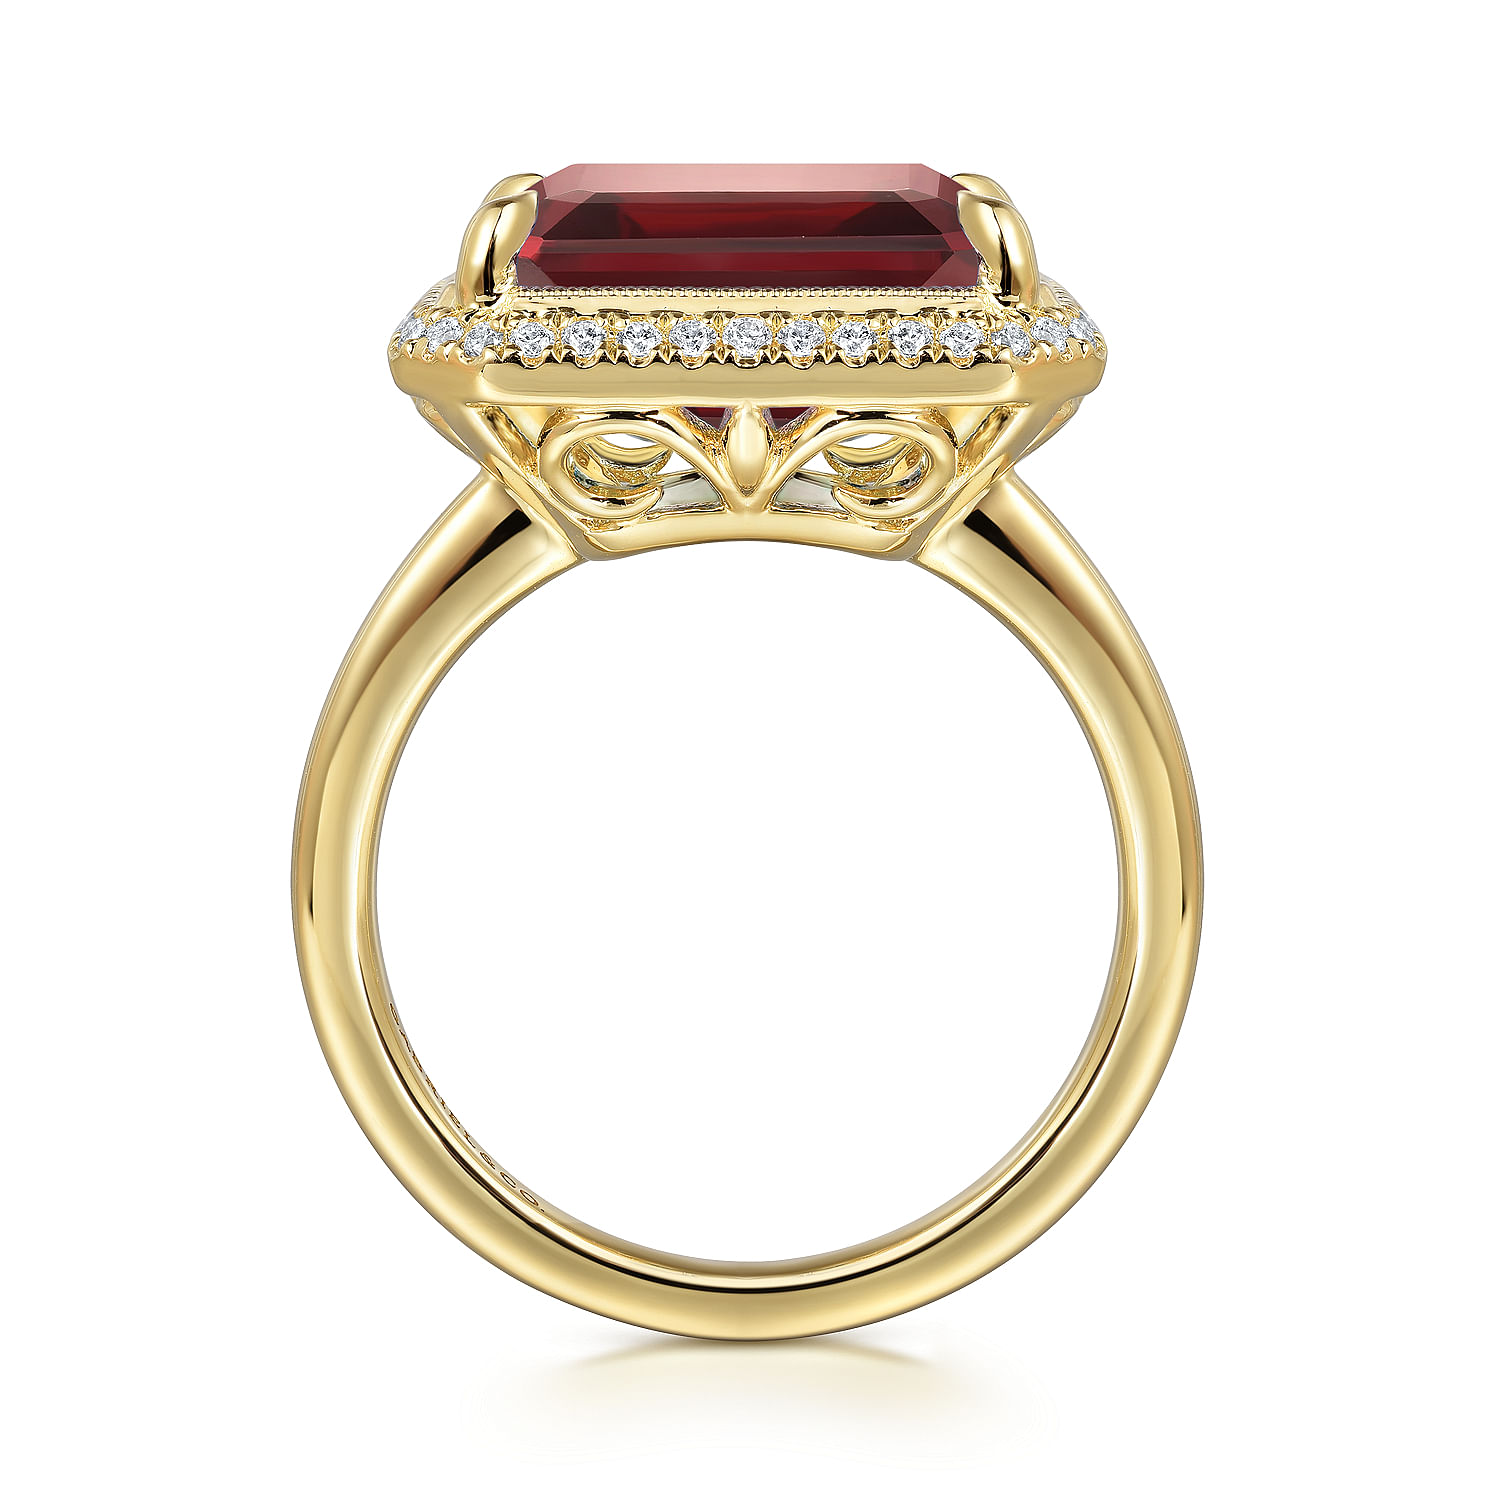 14K Yellow Gold Diamond and Garnet Emerald Cut Ladies Ring With Flower Pattern Gallery